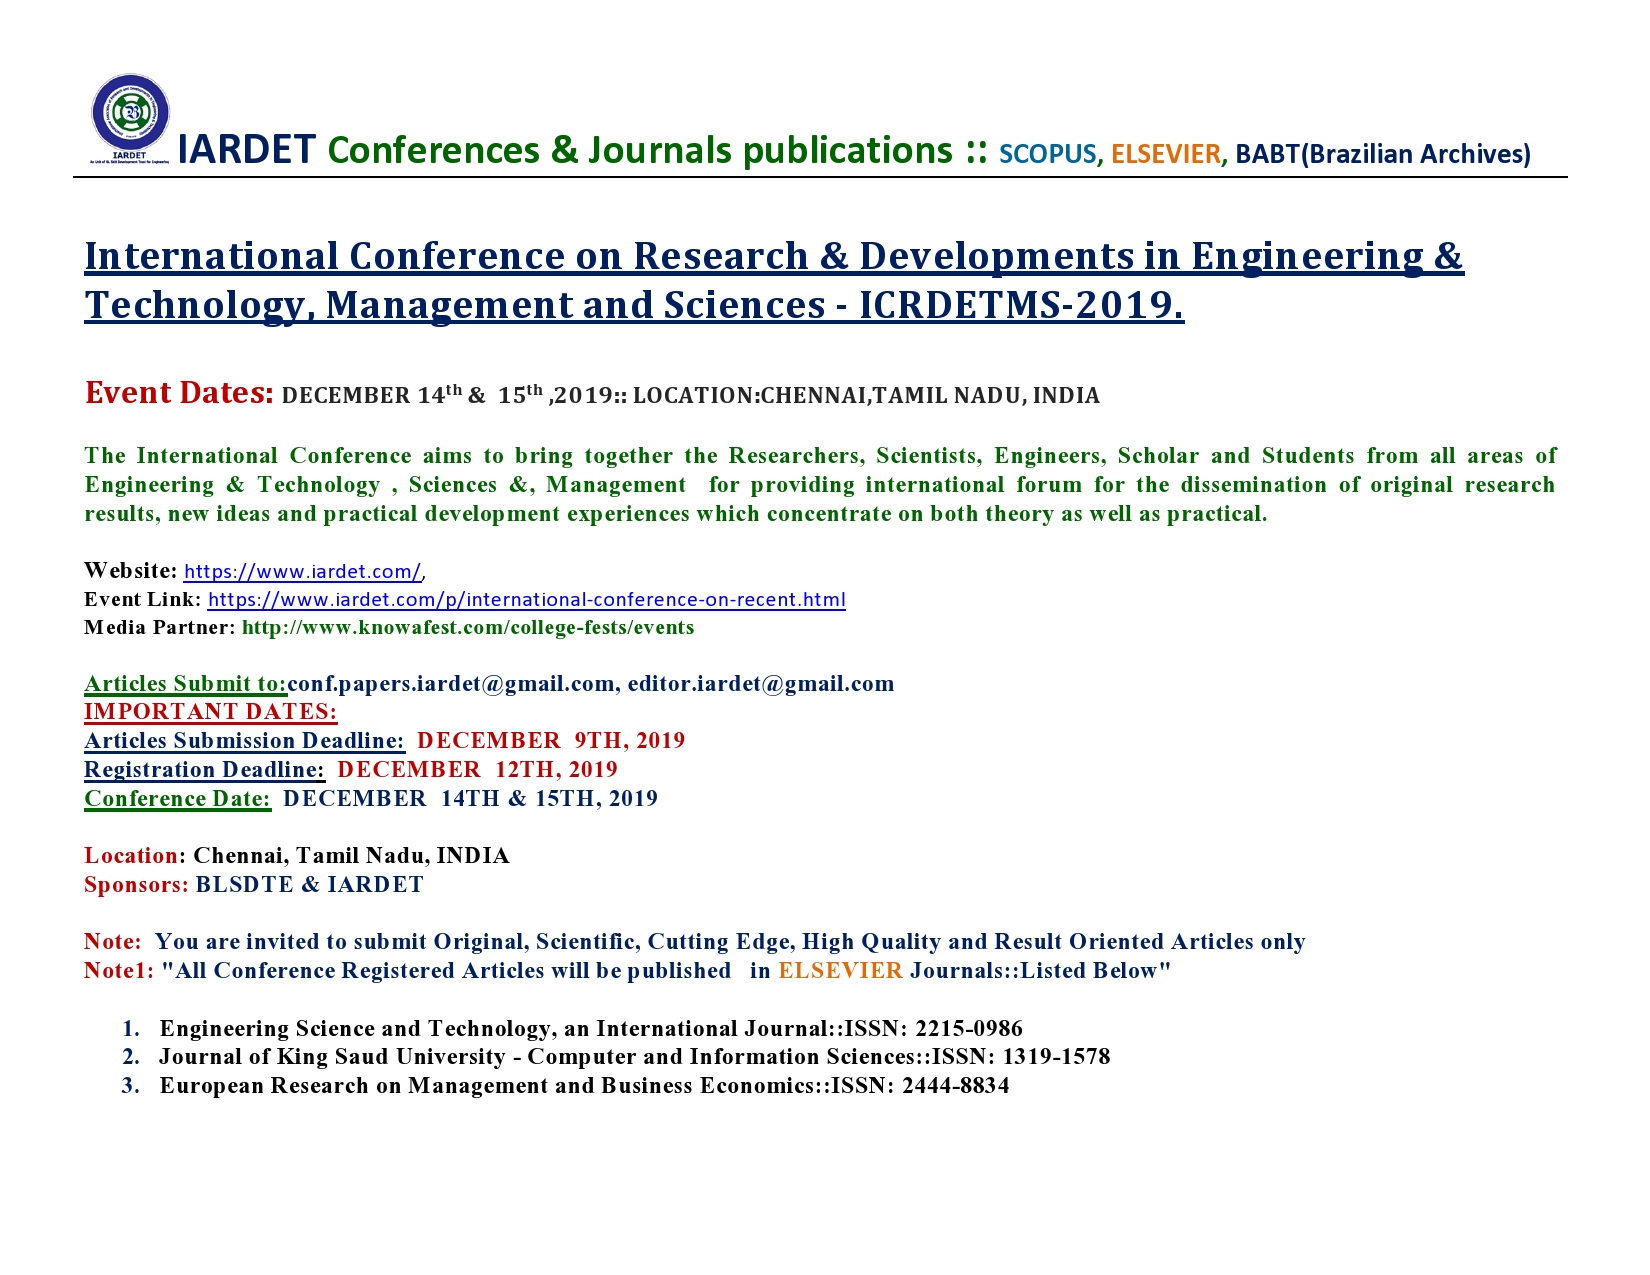 International Conference on Research and Developments in Engineering and Technology, Management and Sciences ICRDETMS 2019